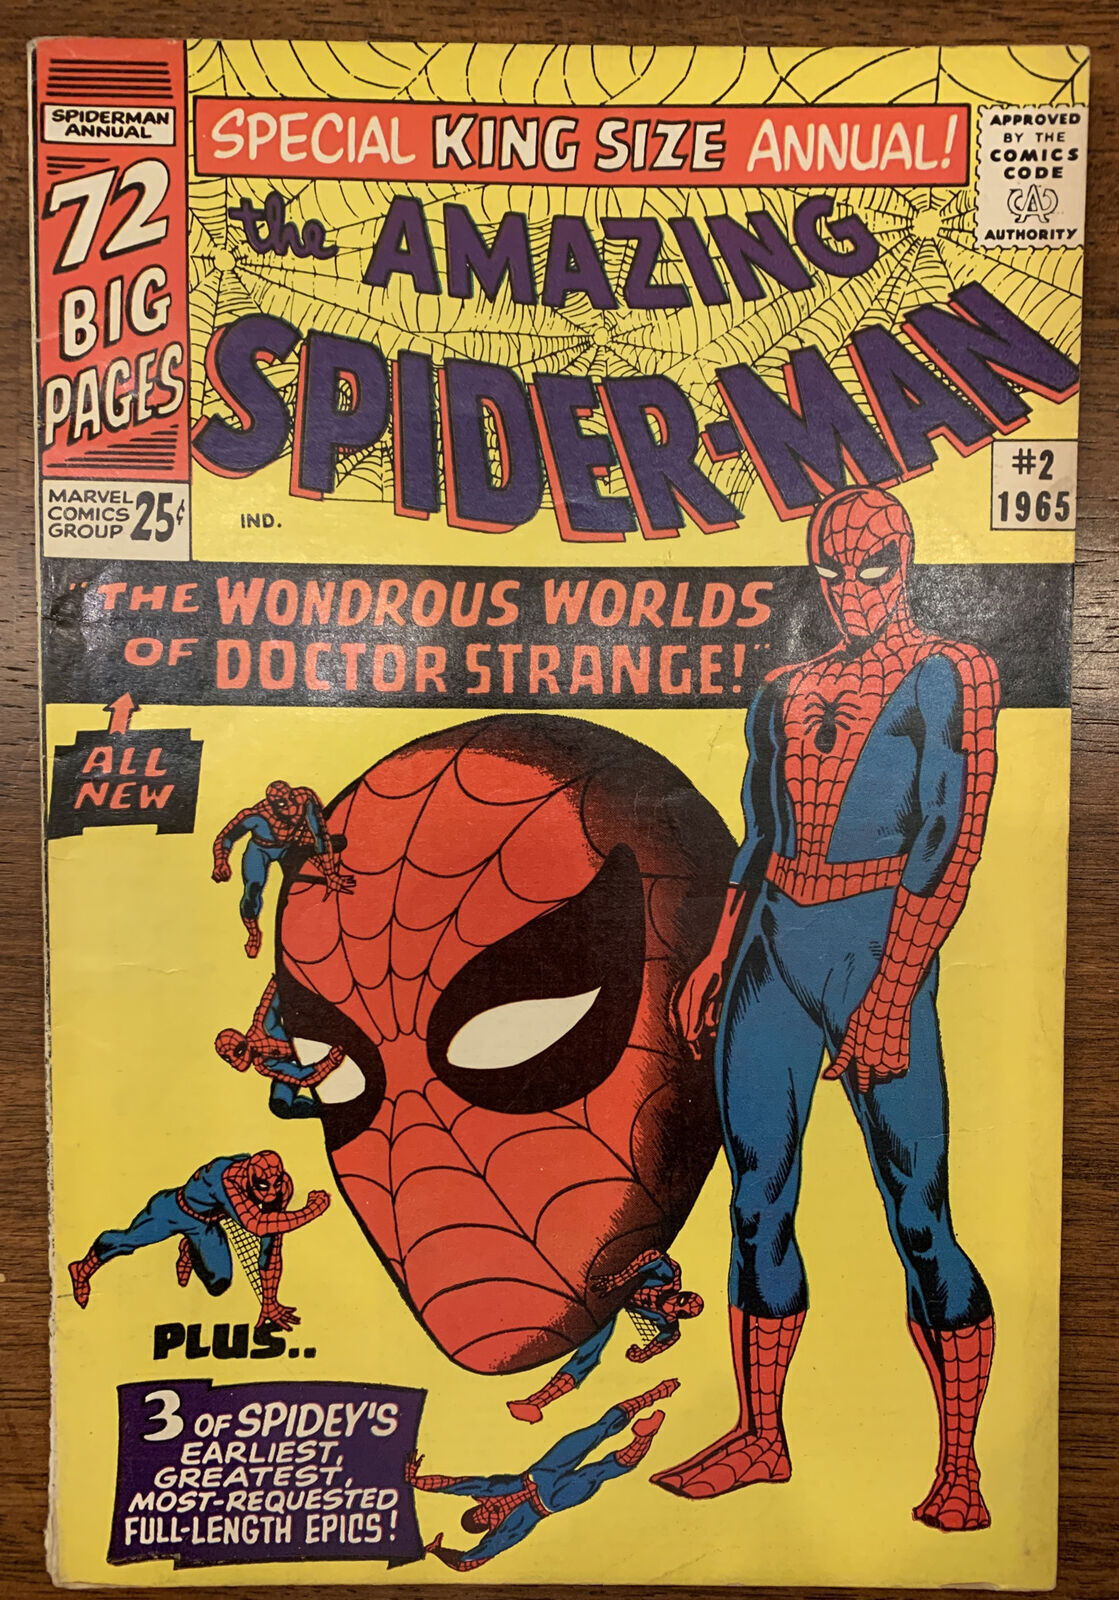 Amazing Spider-Man Annual #2 (1965) 1st team up of Spider-man and Dr. Strange...